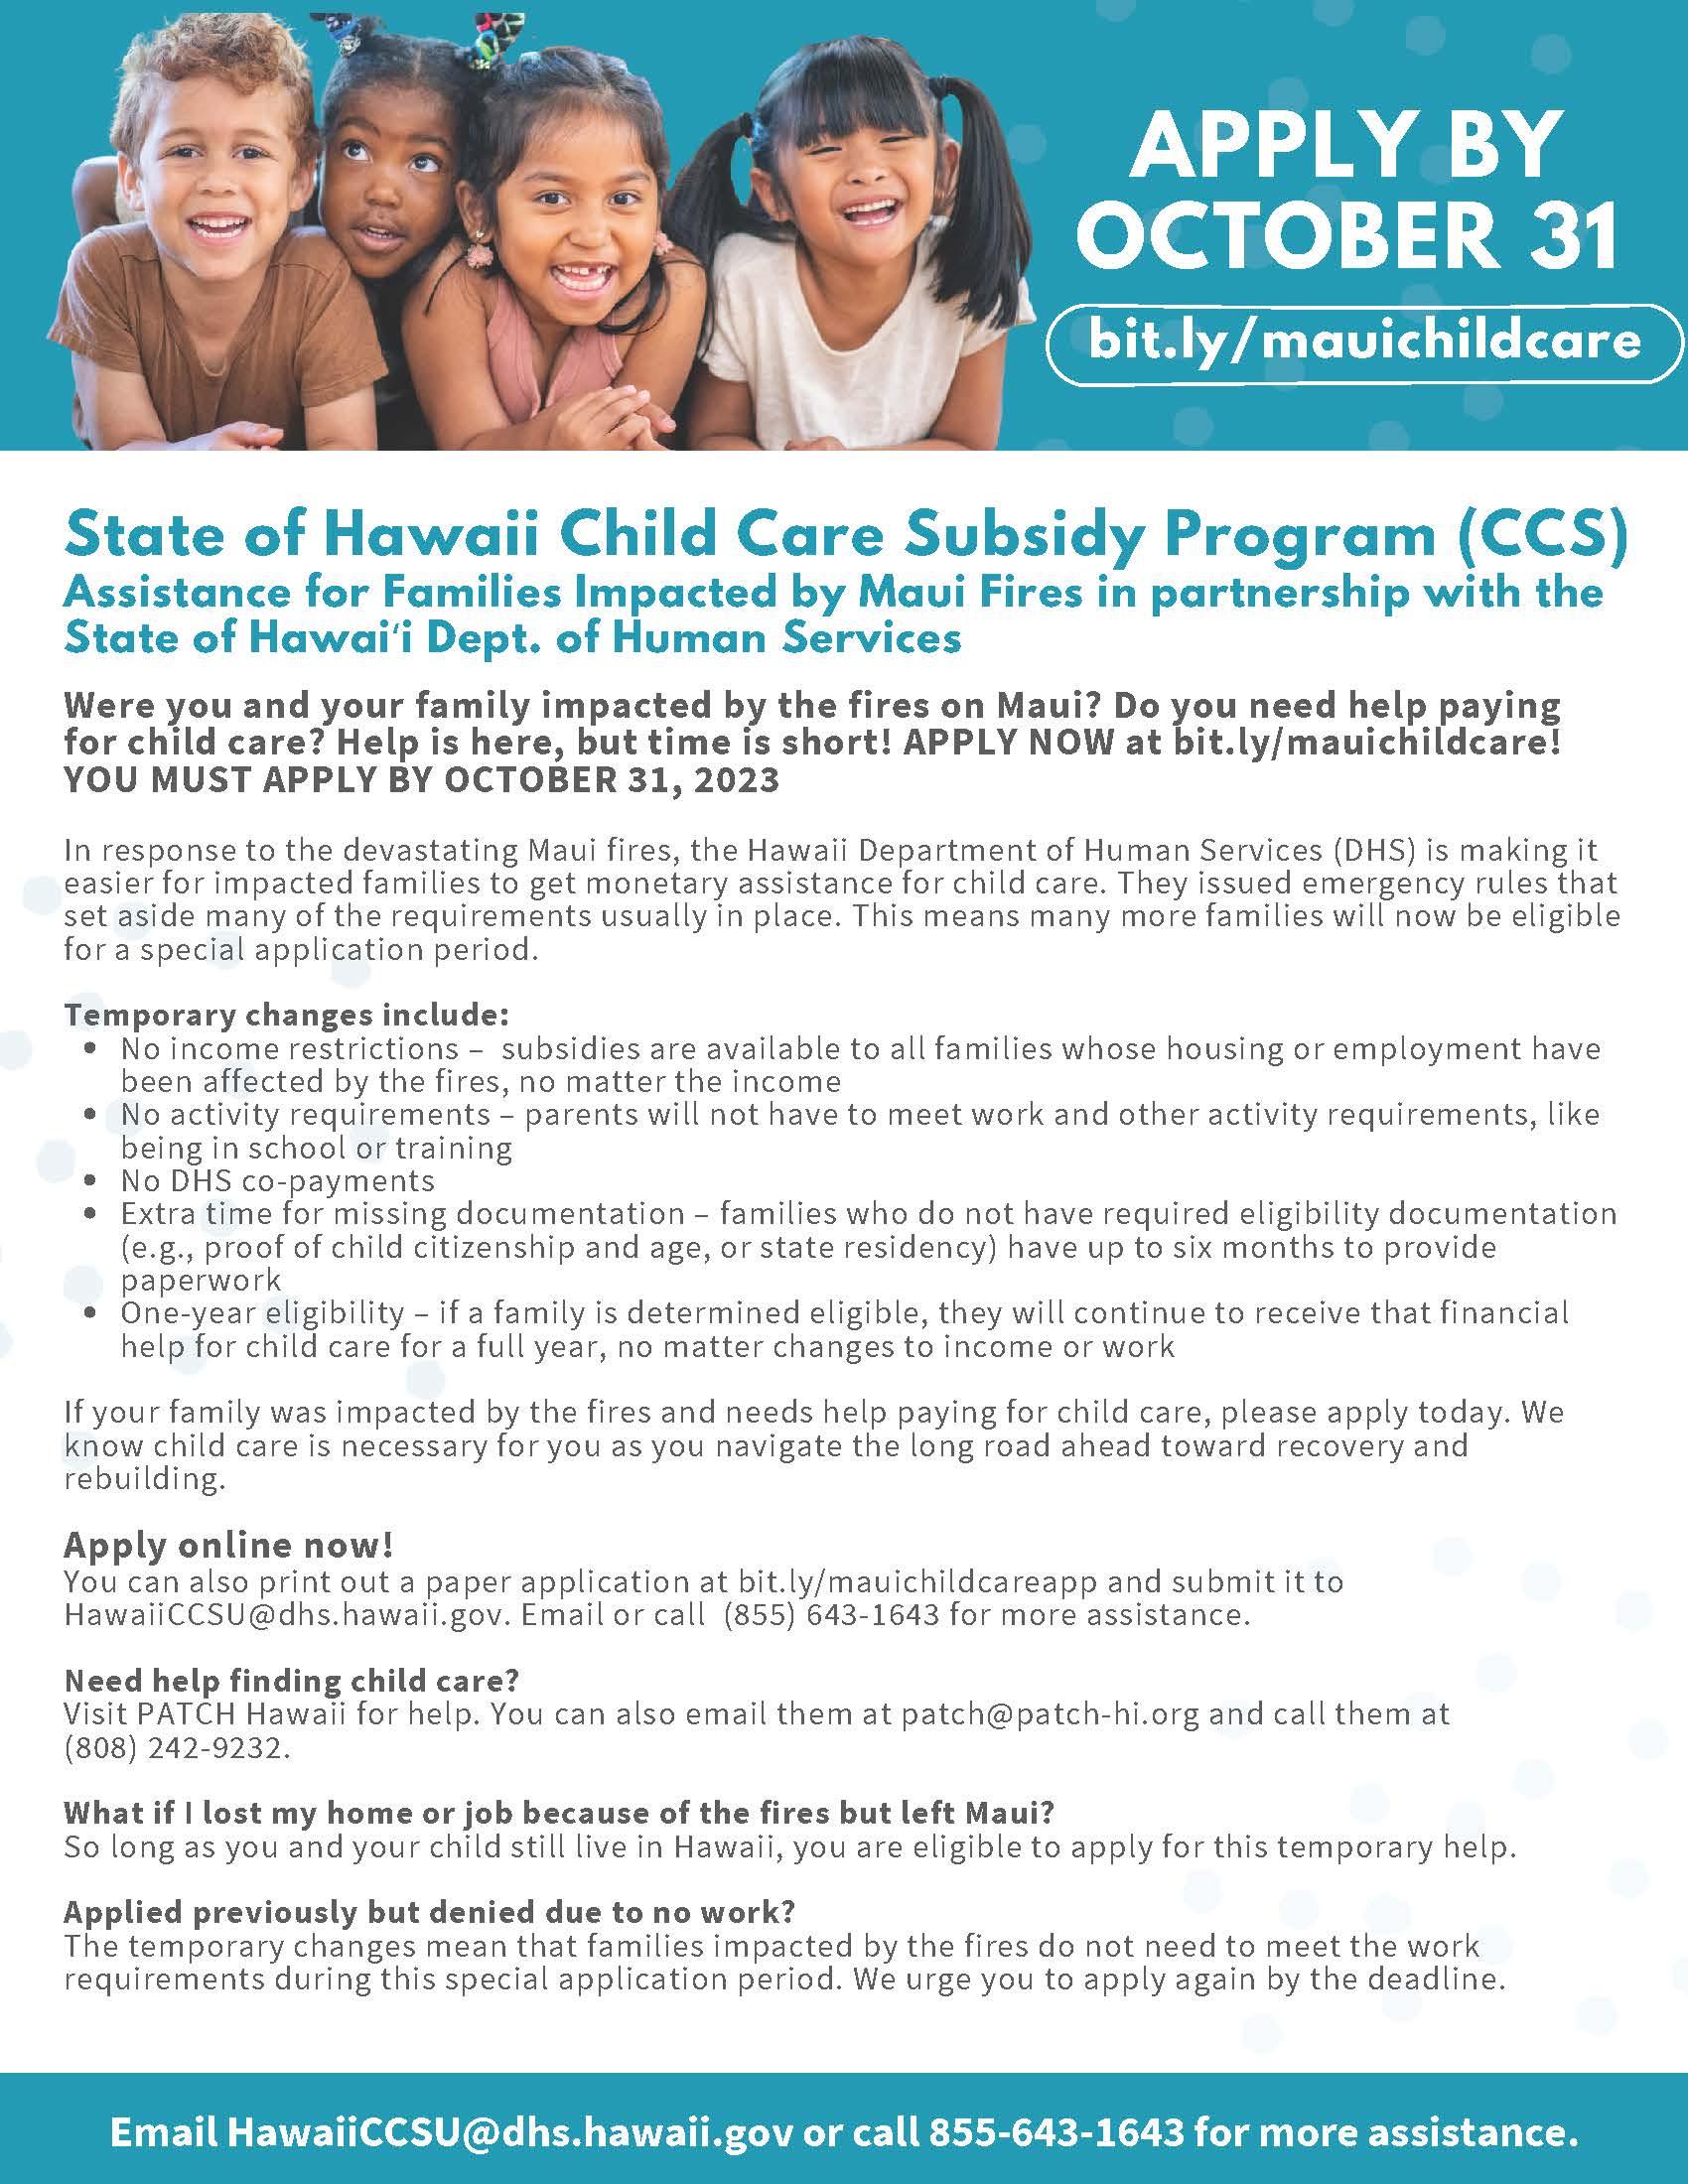 Child Care Financial Help